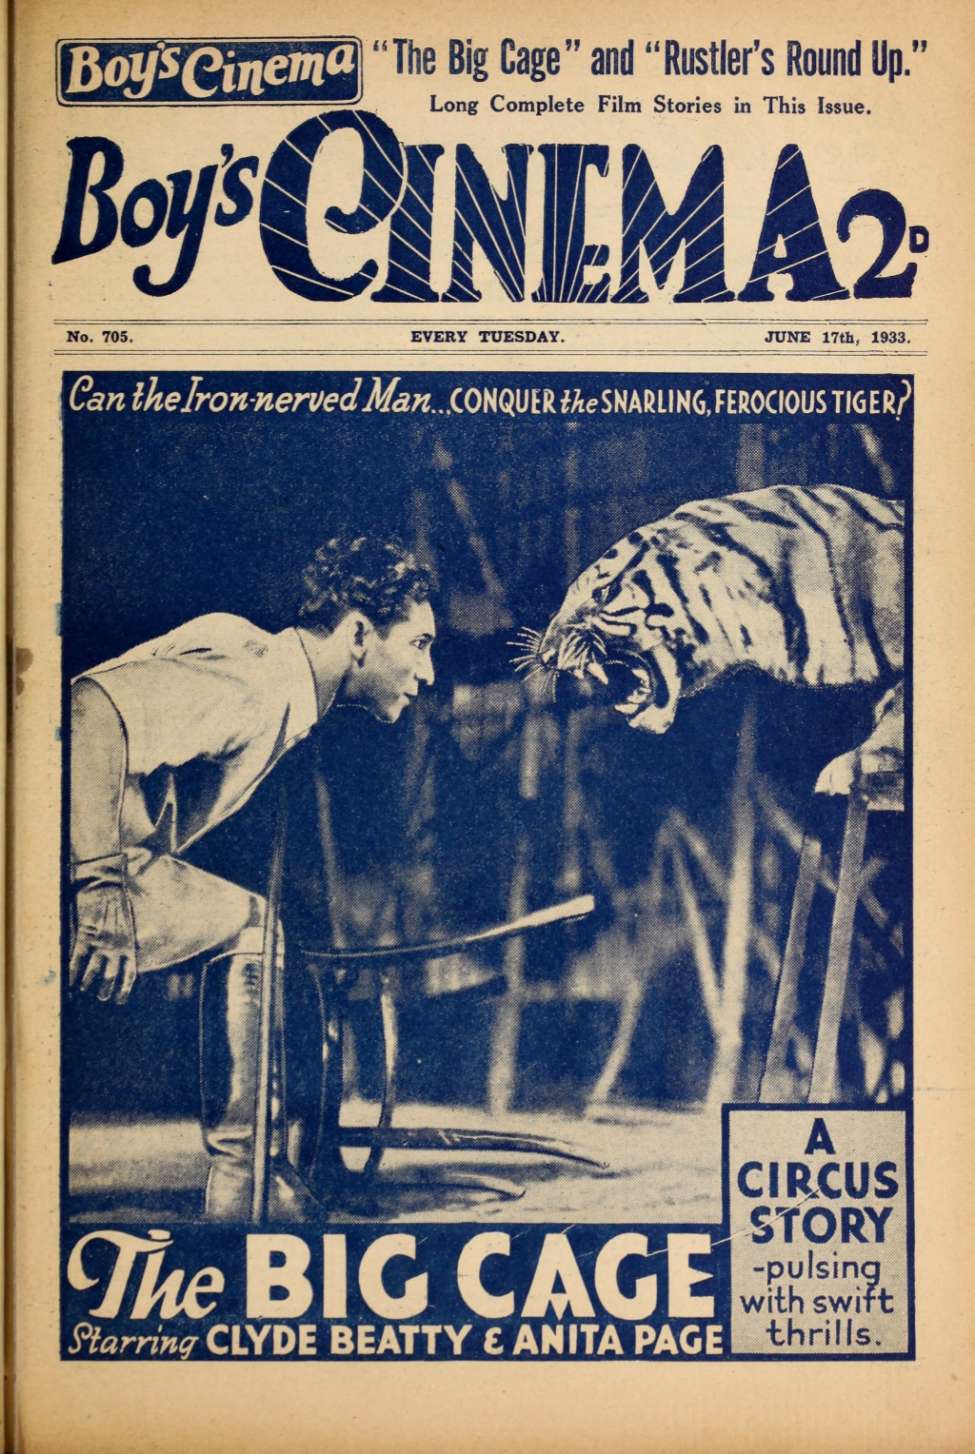 Comic Book Cover For Boy's Cinema 705 - The Big Cage - Clyde Beatty